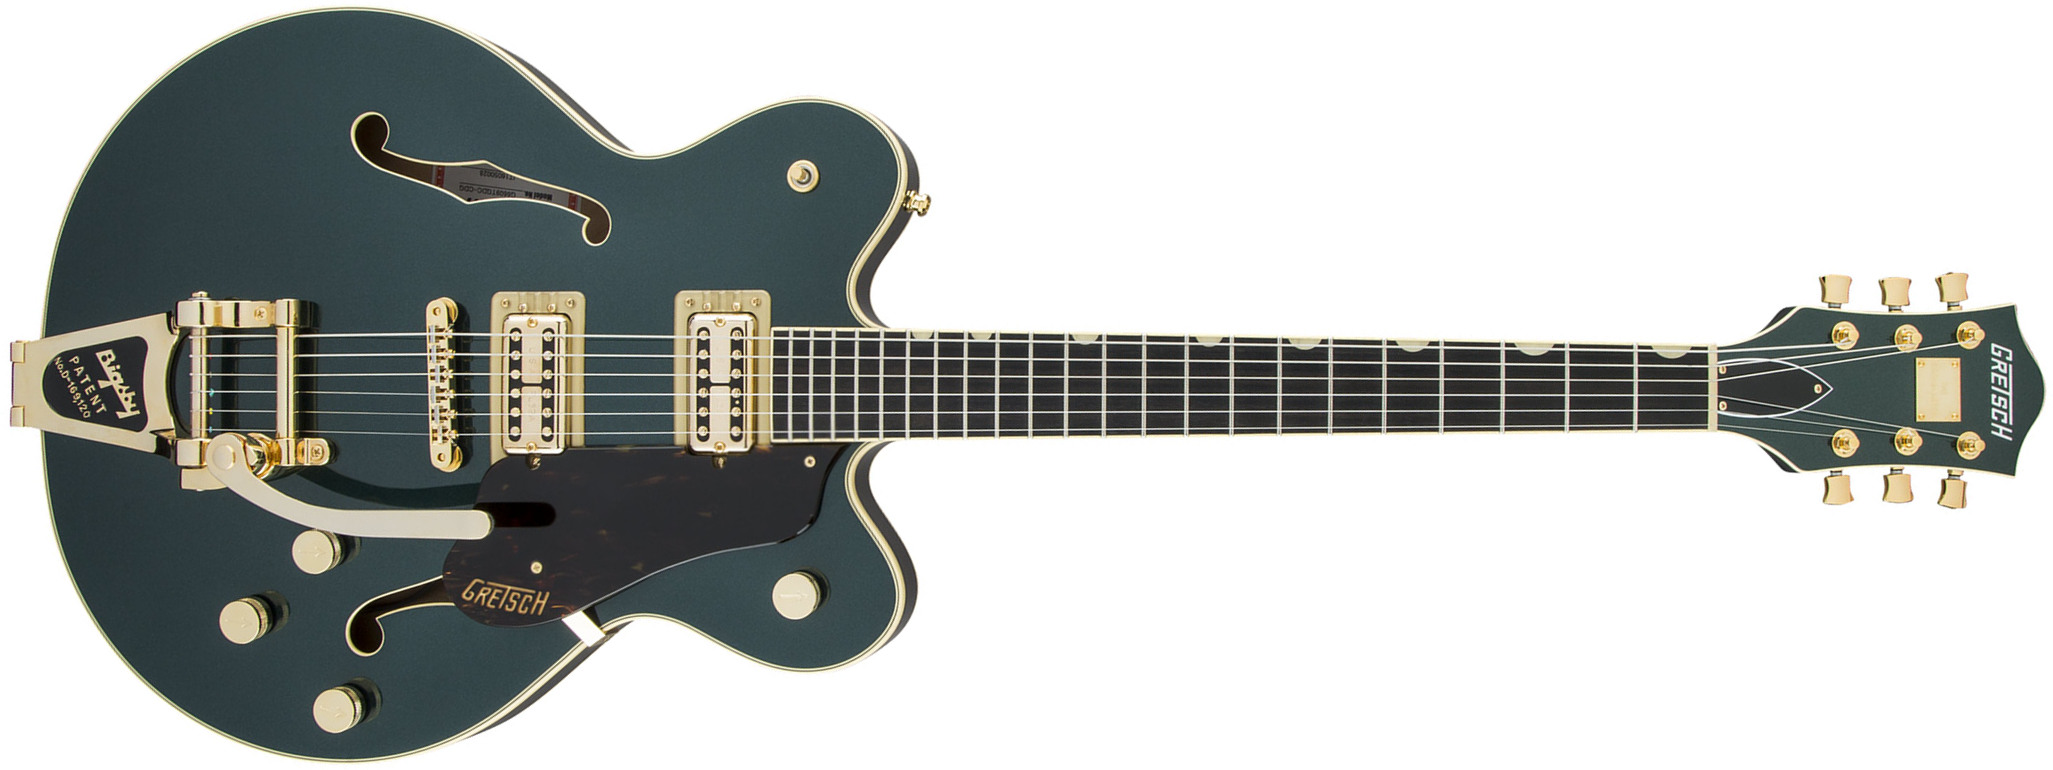 Gretsch G6609tg Broadkaster Center Block Dc Bigsby Gh Jap 2h Trem Eb - Cadillac Green - Semi-hollow electric guitar - Main picture